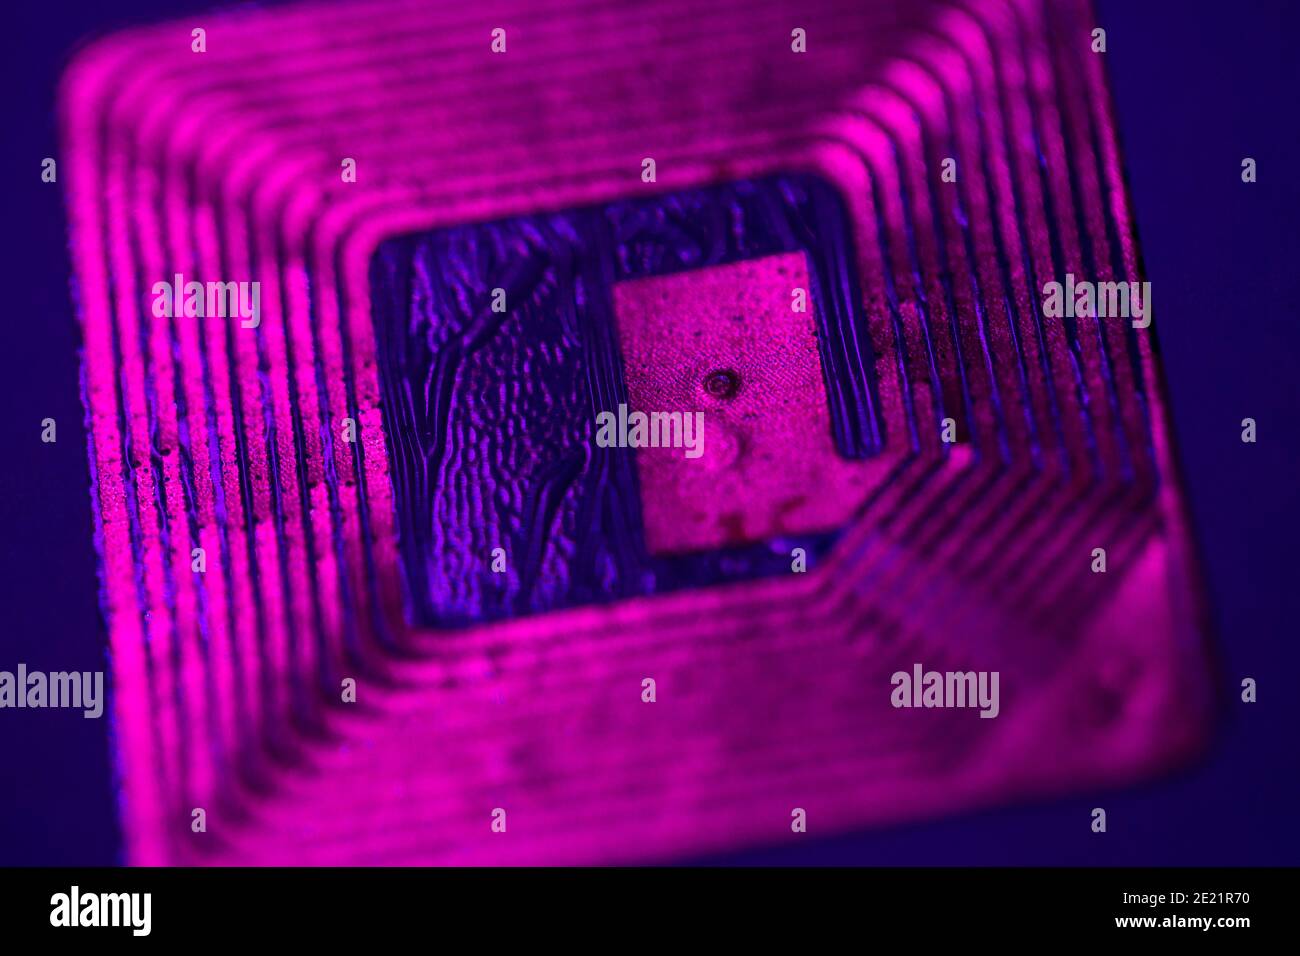 Close up of RFID tag under ultraviolet light. Stock Photo